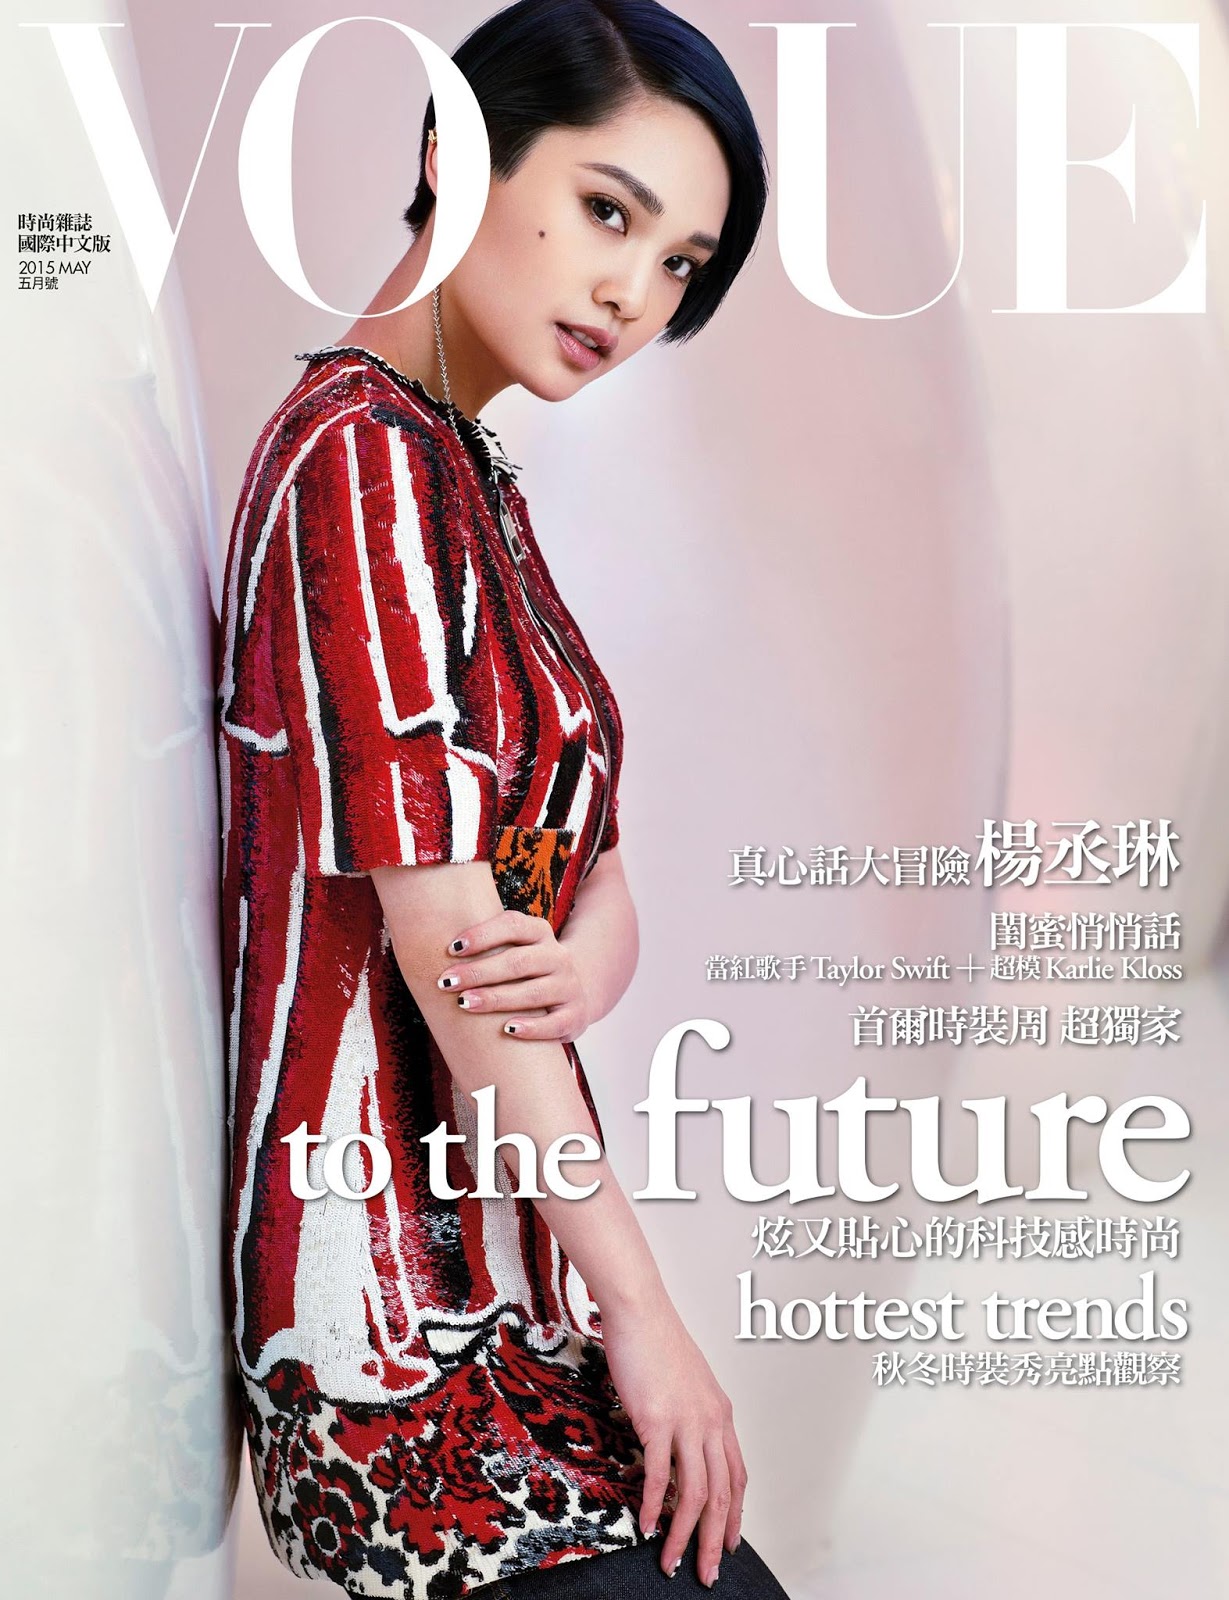 Vogue's Covers: Vogue Taiwan